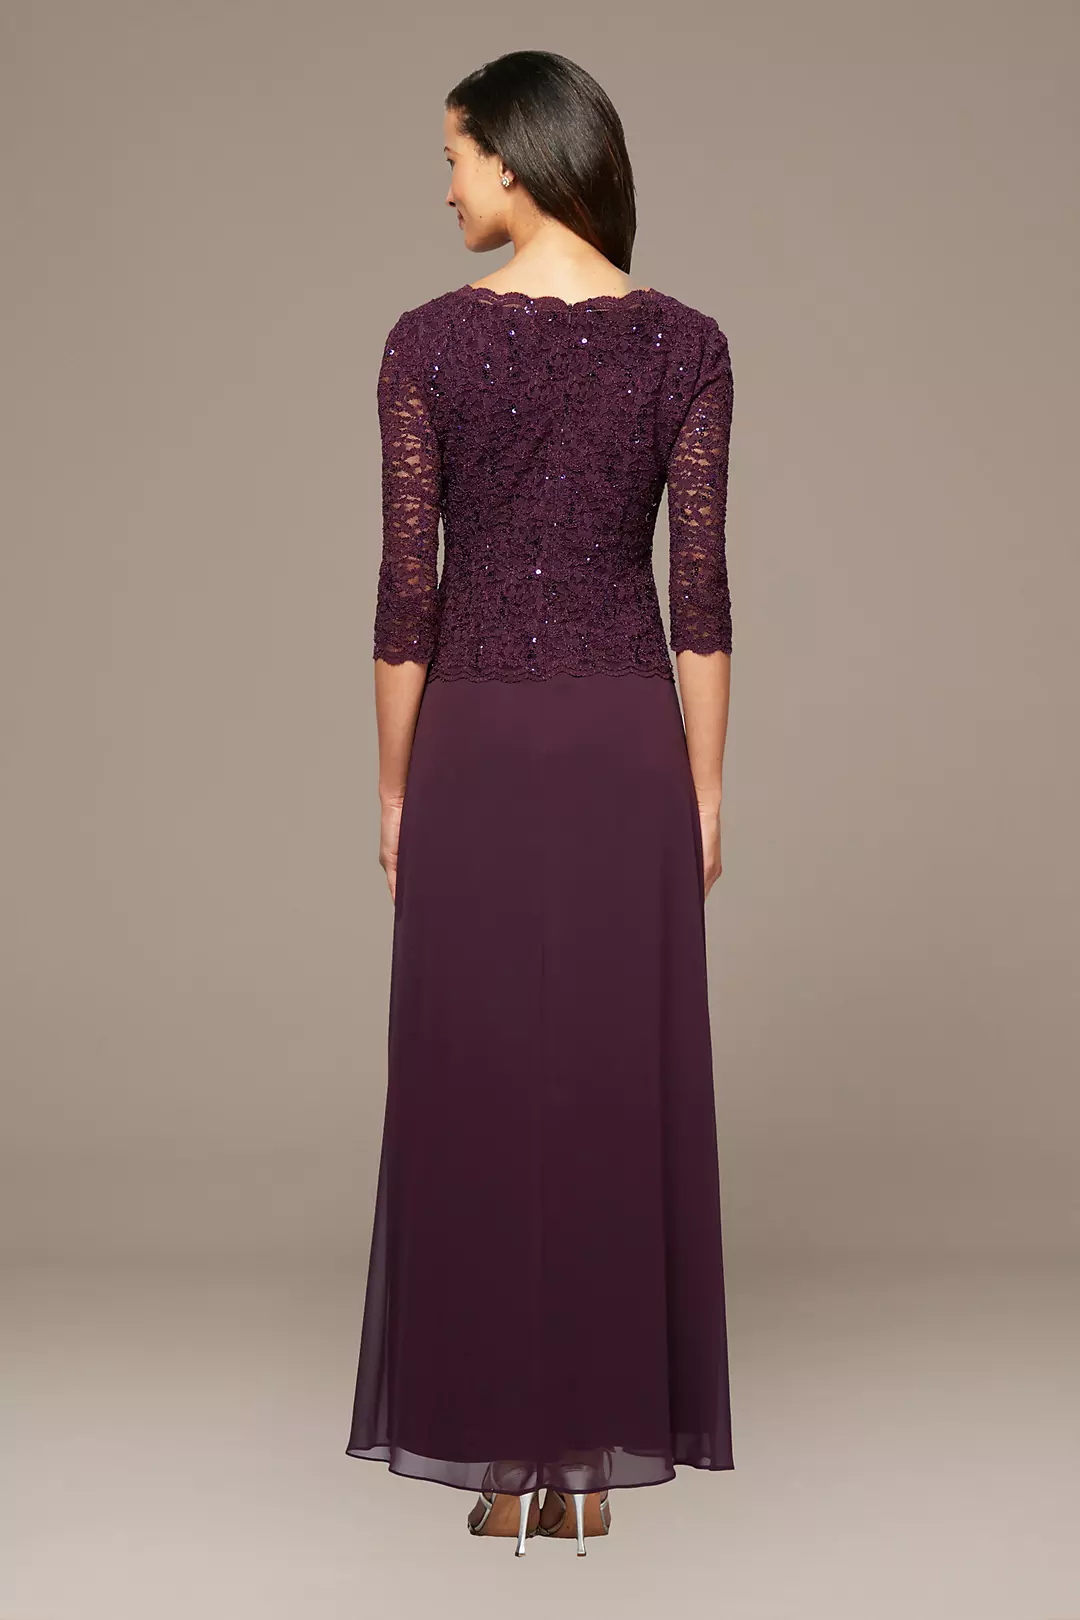 Sequin Lace Boatneck Petite Gown Image 2